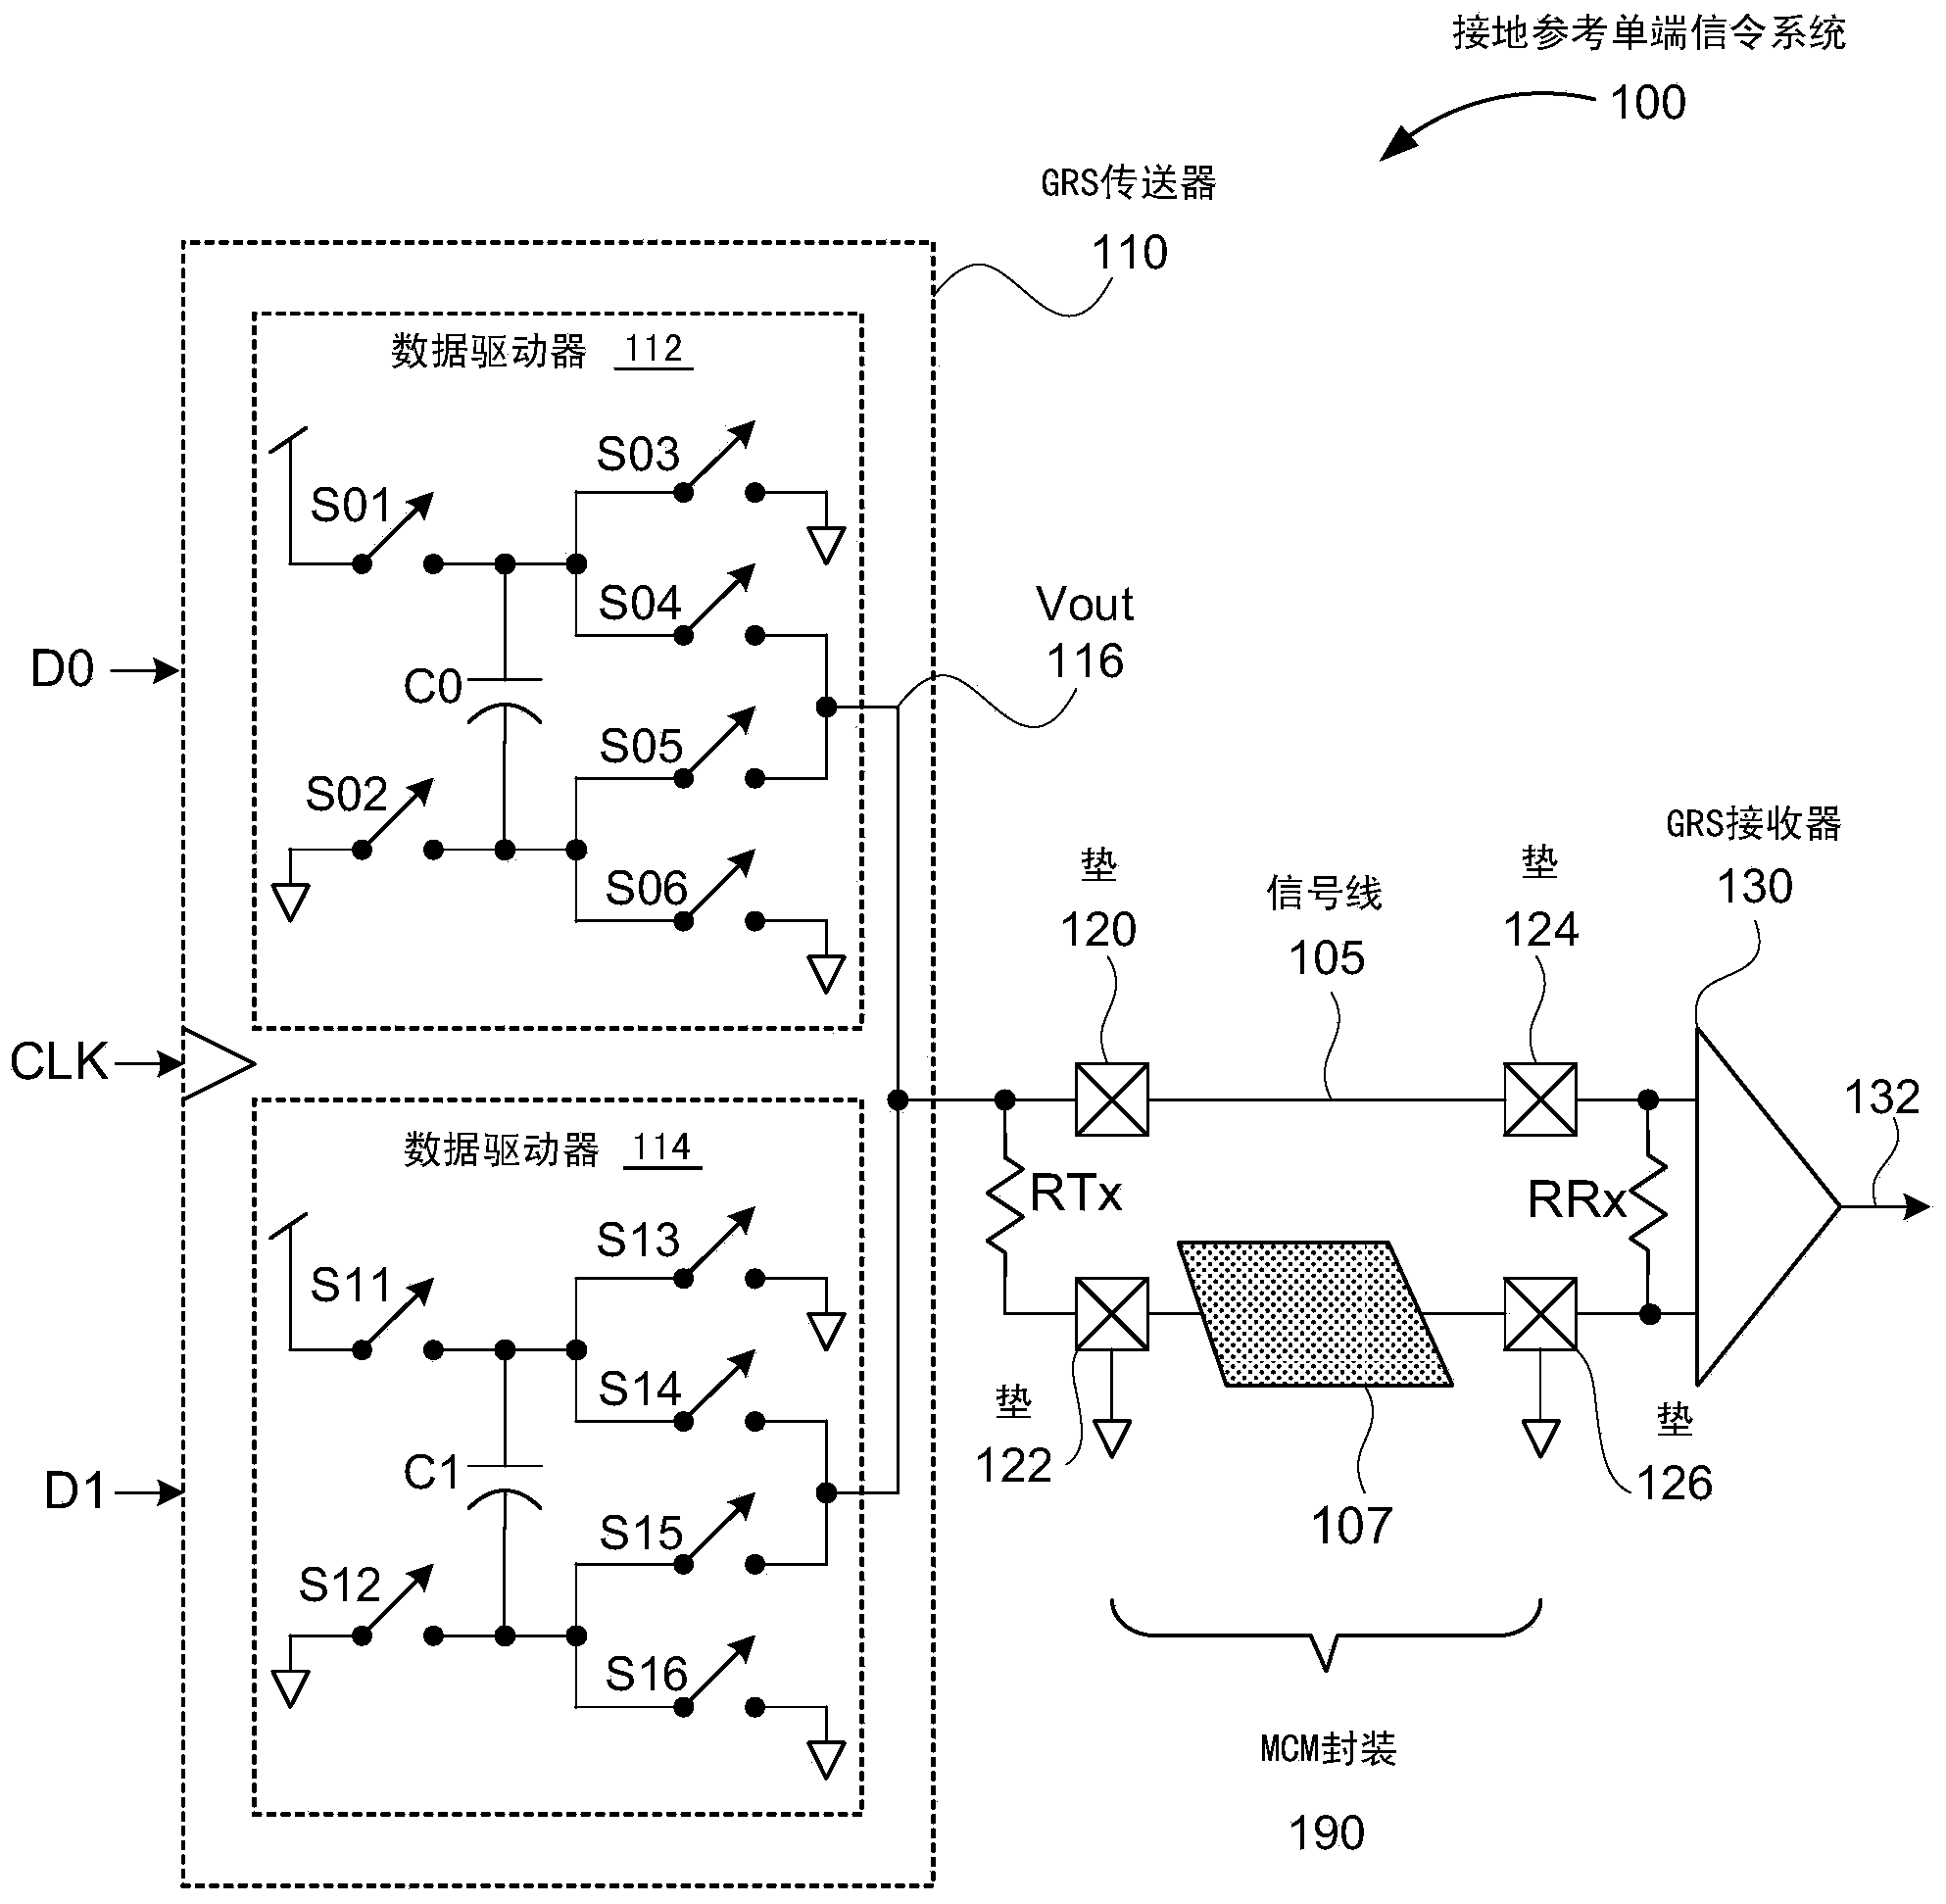 Ground-referenced single-ended signaling connected graphics processing unit multi-chip module